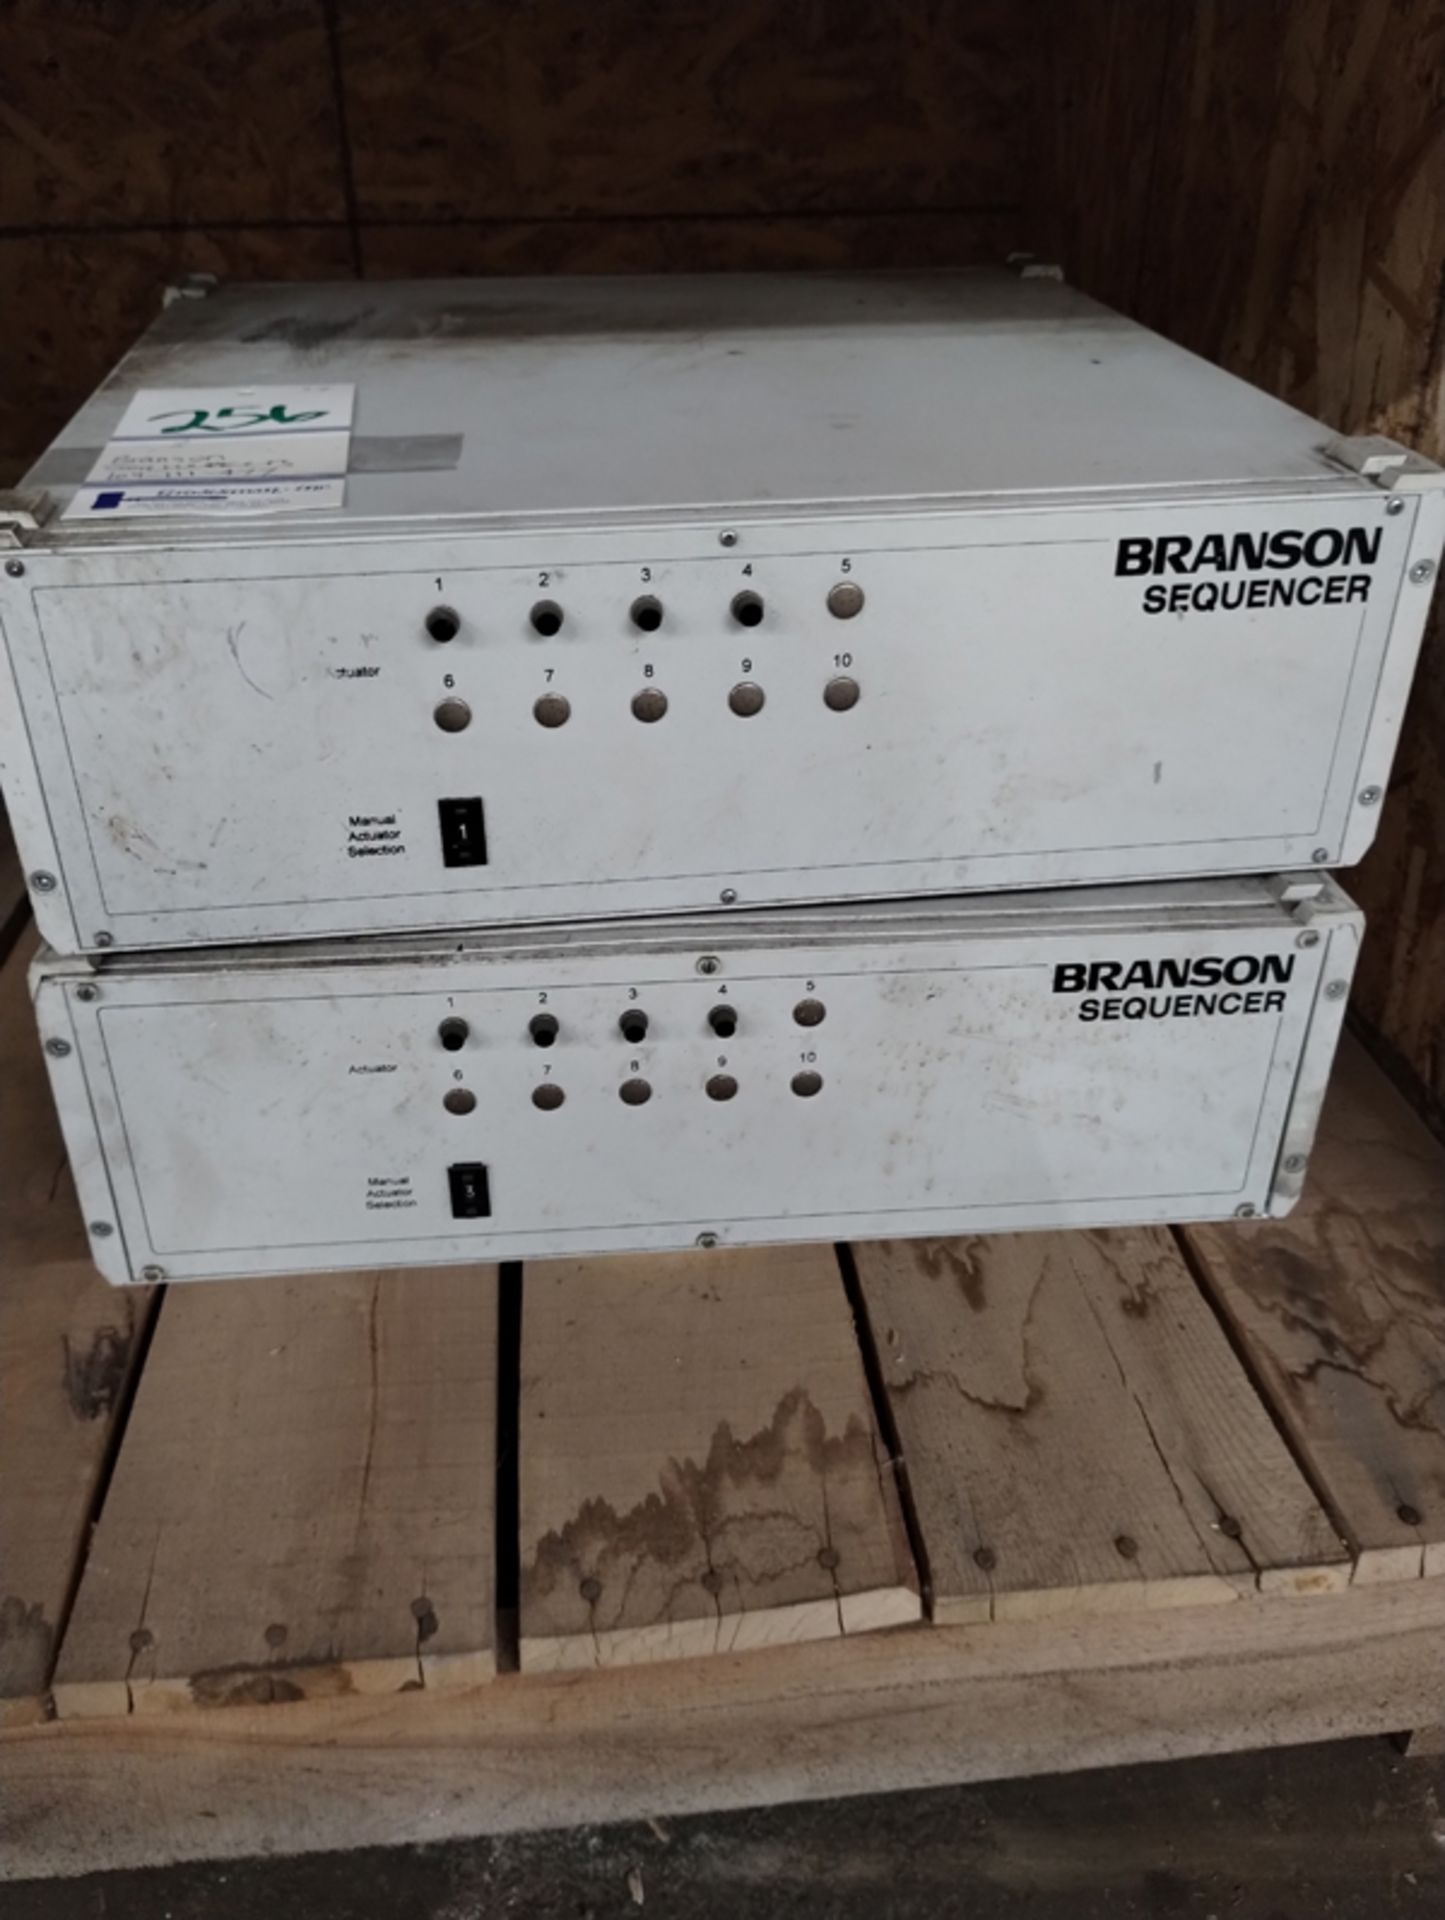 2 BRANSON SEQUENCERS 109-111-477